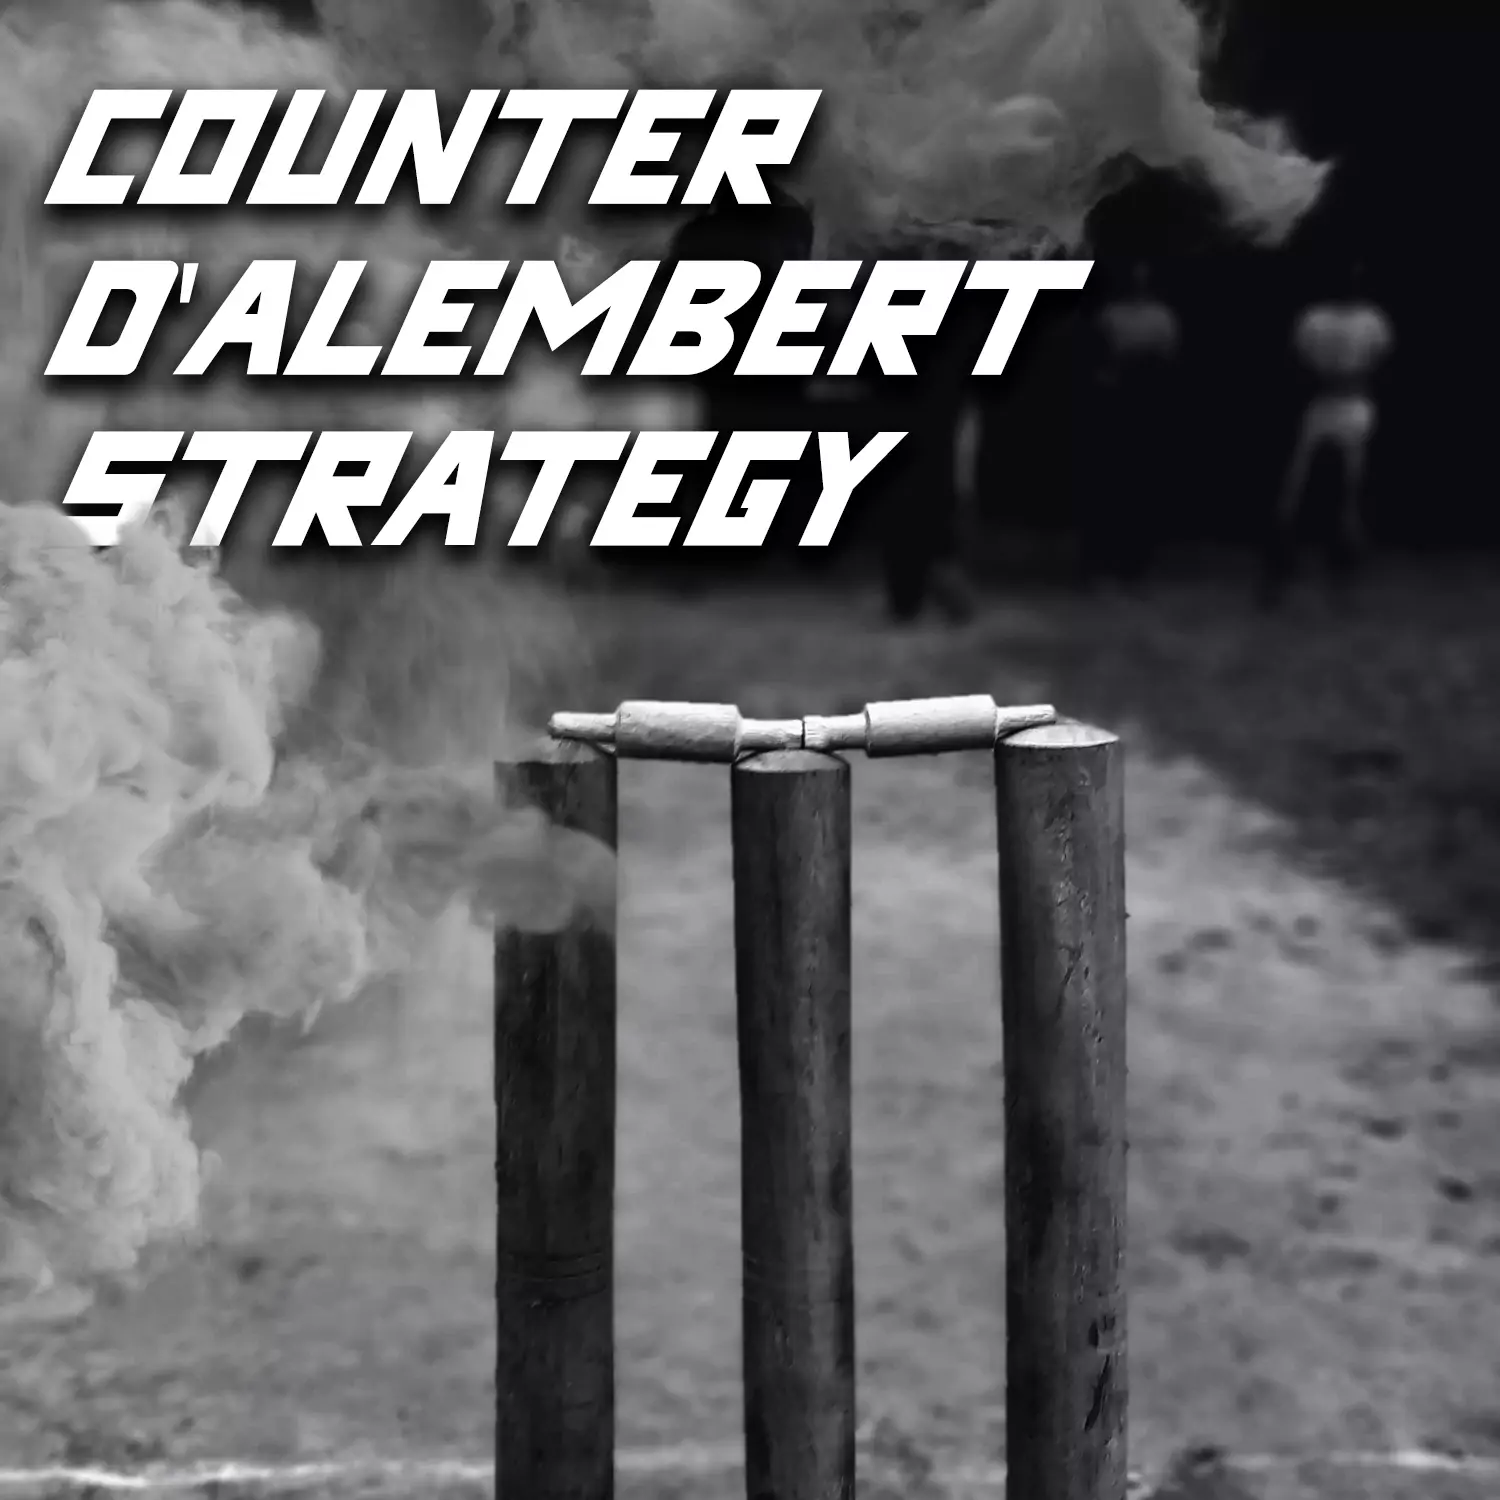 Use Counter-D'Alembert Cricket Betting Strategy to increase your chances of winning.